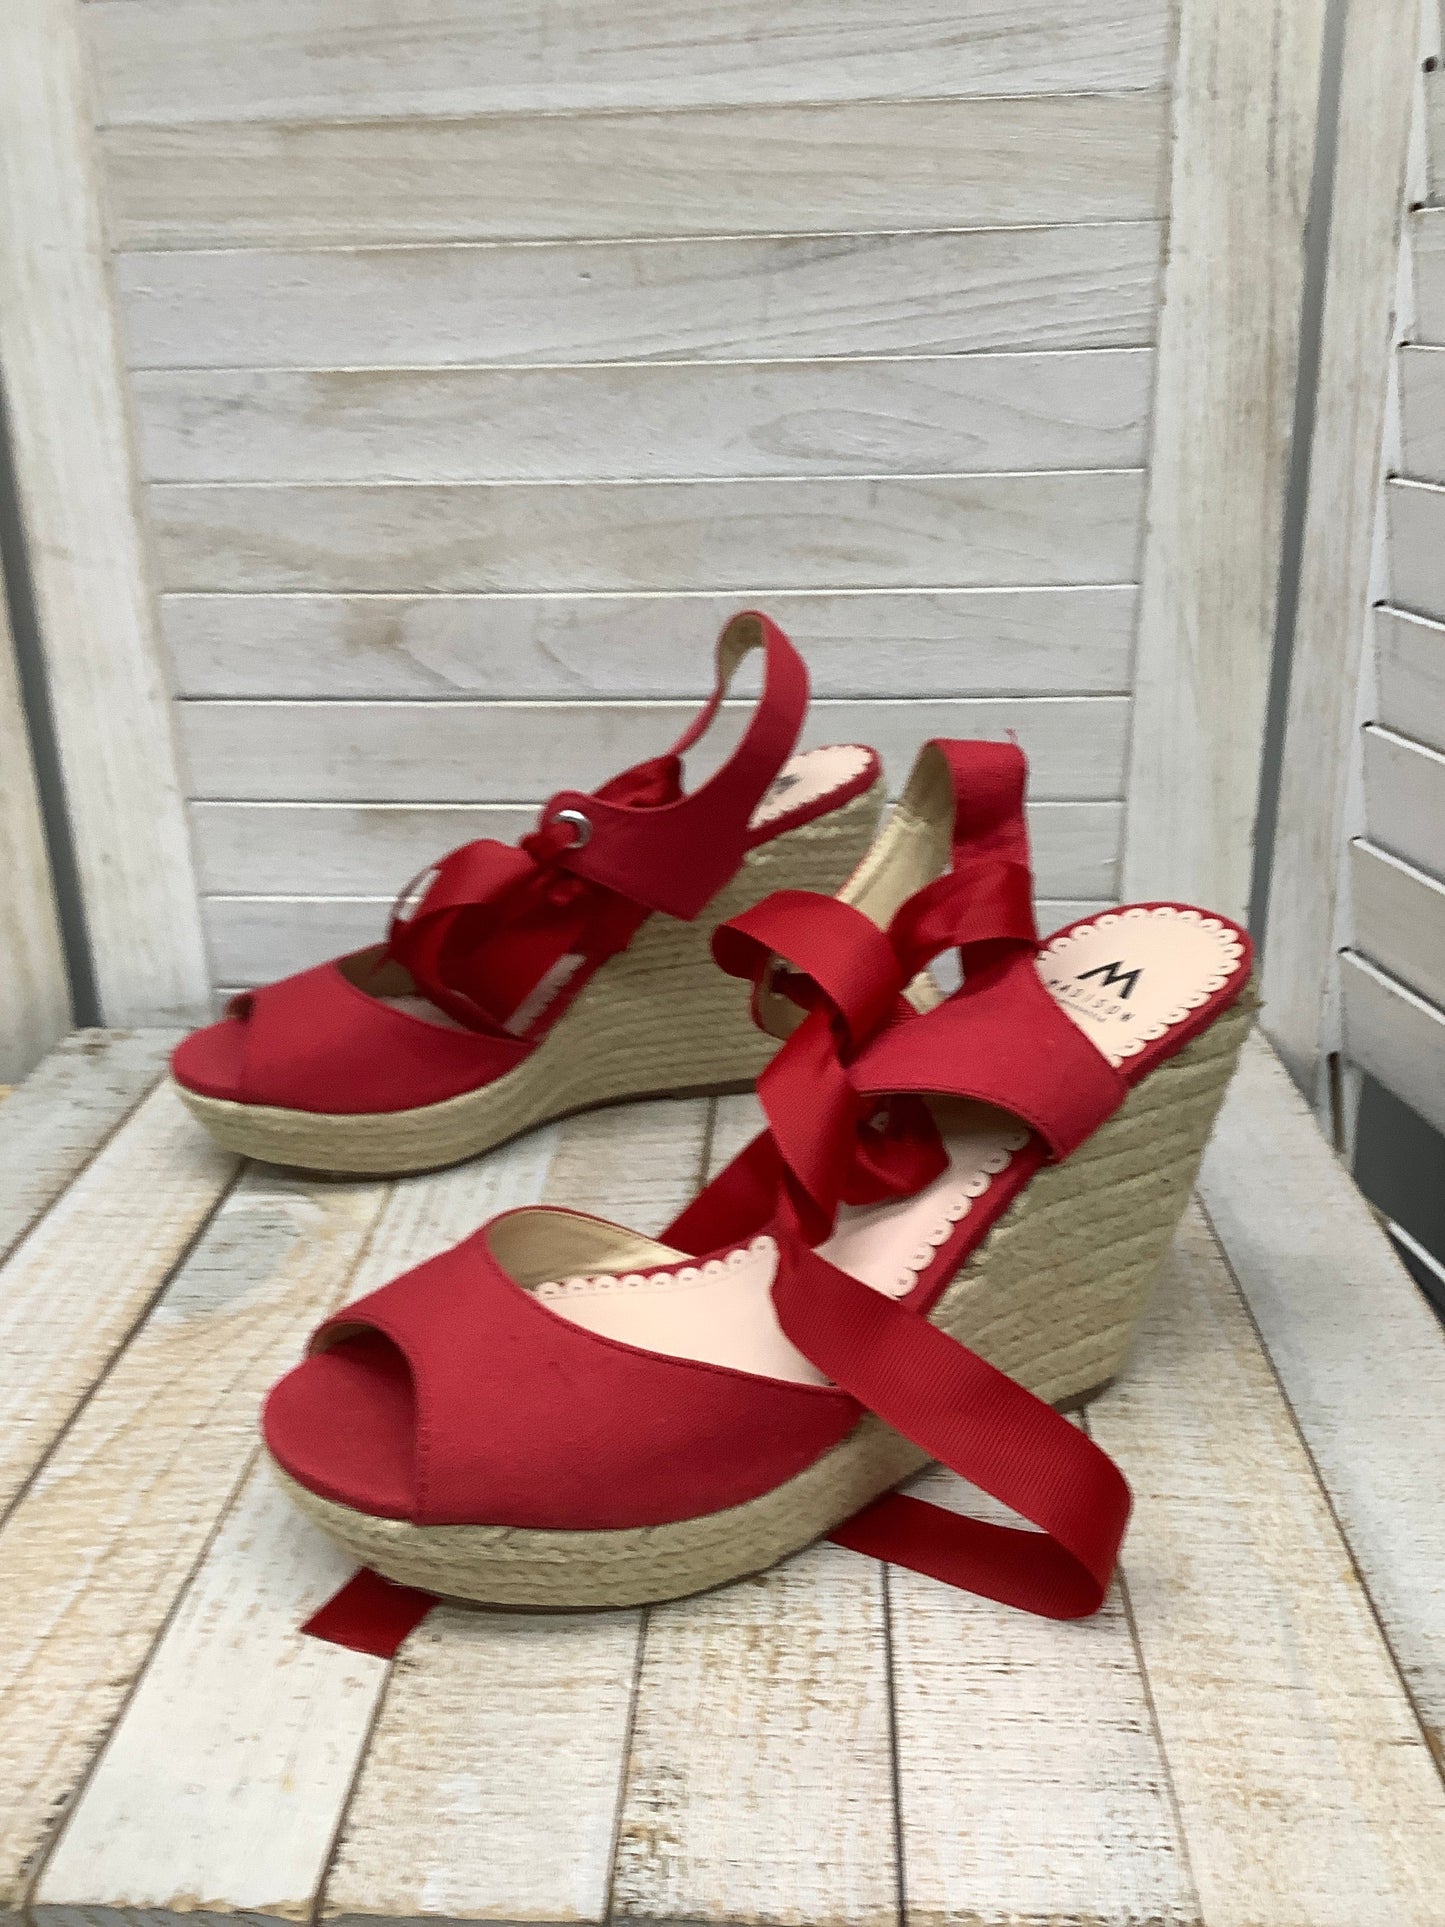 Sandals Heels Wedge By Madison  Size: 9.5